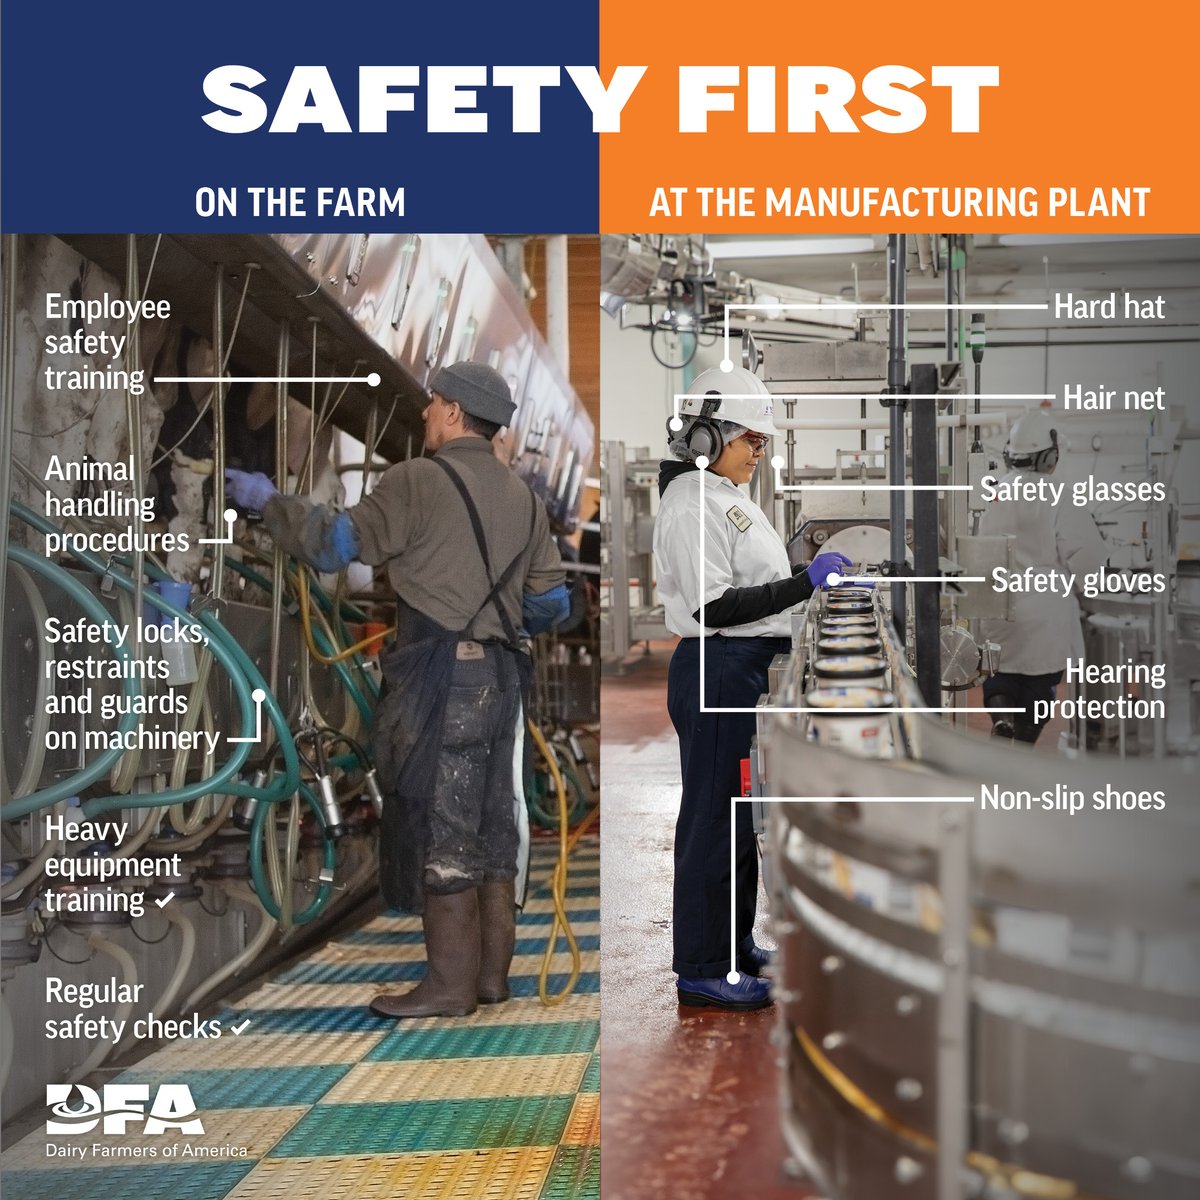 We're celebrating #WorldDayforSafetyandHealthatWork! 🎉 At DFA, safety is our priority, from 🐄 farms to 🏭 dairy manufacturing plants. Our farmer-owners ensure their employees and herds are safe, while our EHS team equips plant workers with top safety gear and training.